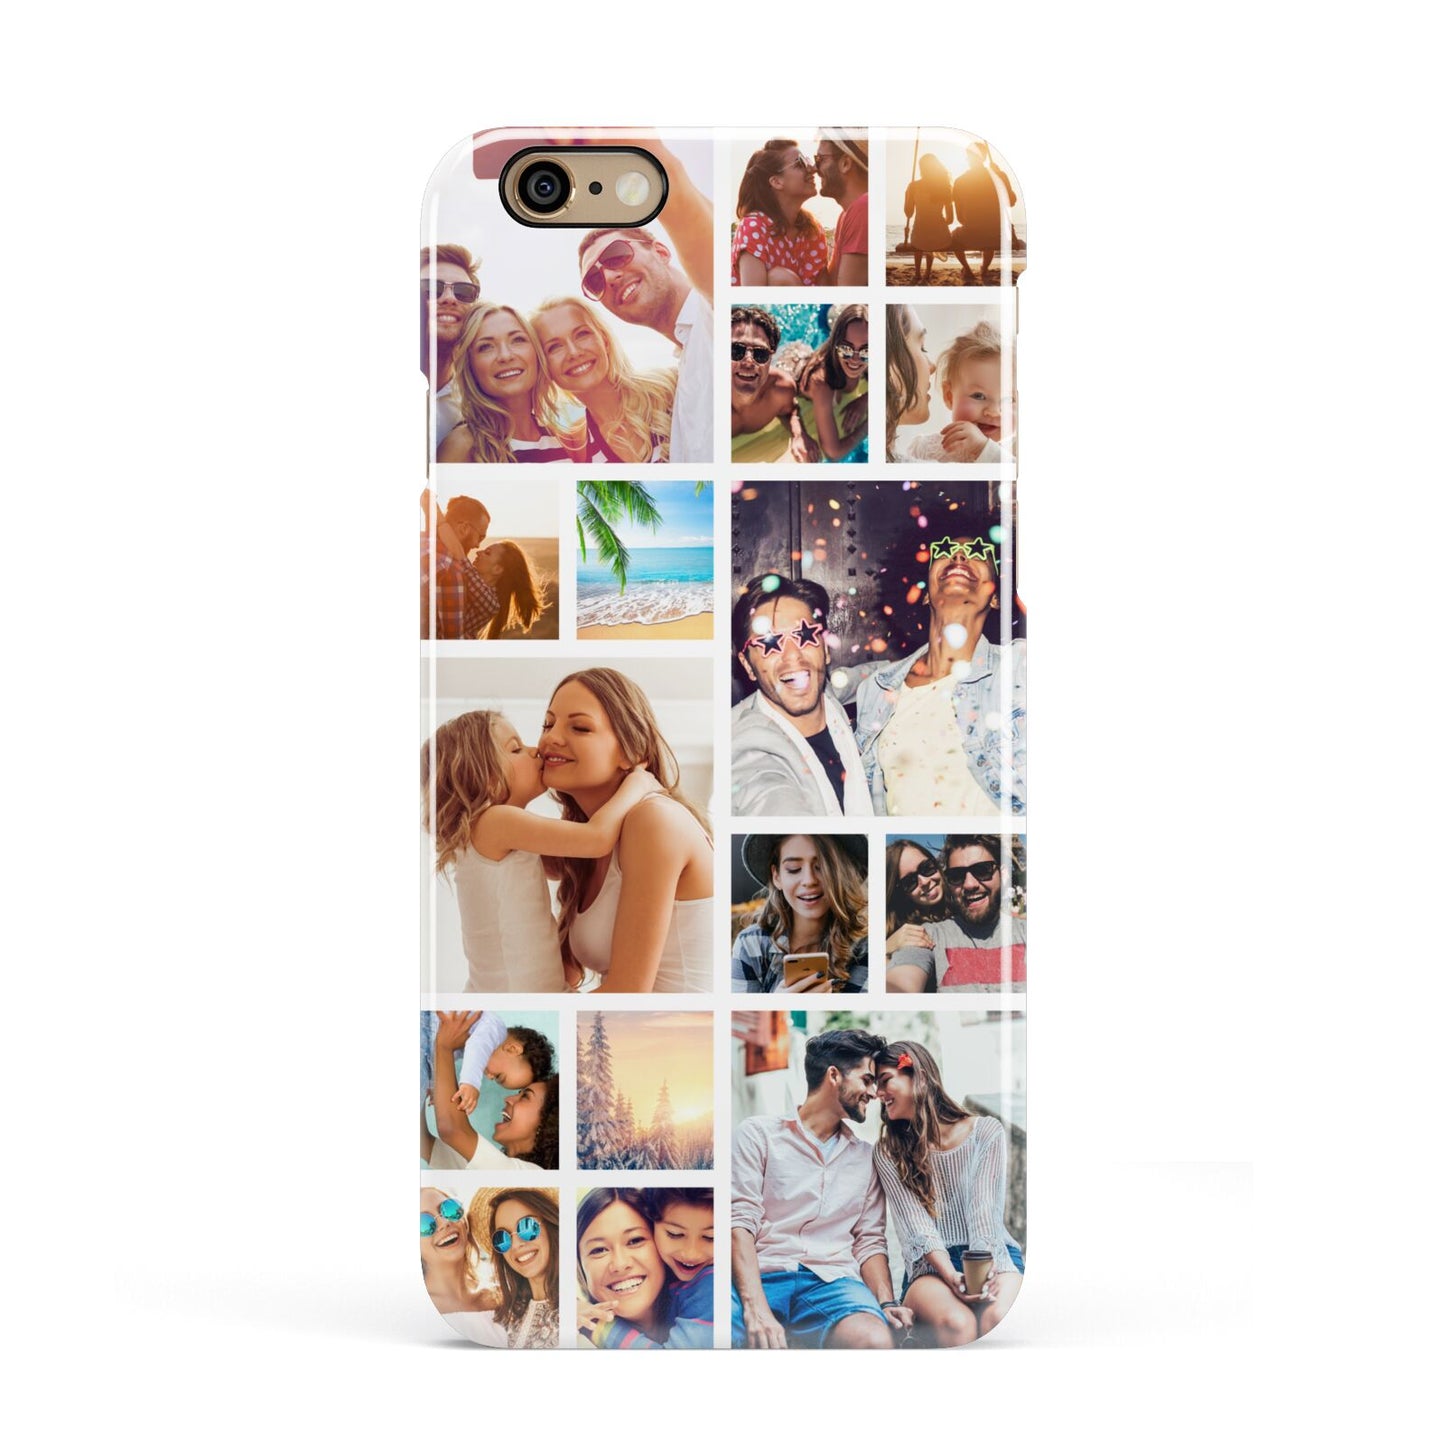 Abstract Multi Tile Photo Montage Upload Apple iPhone 6 3D Snap Case